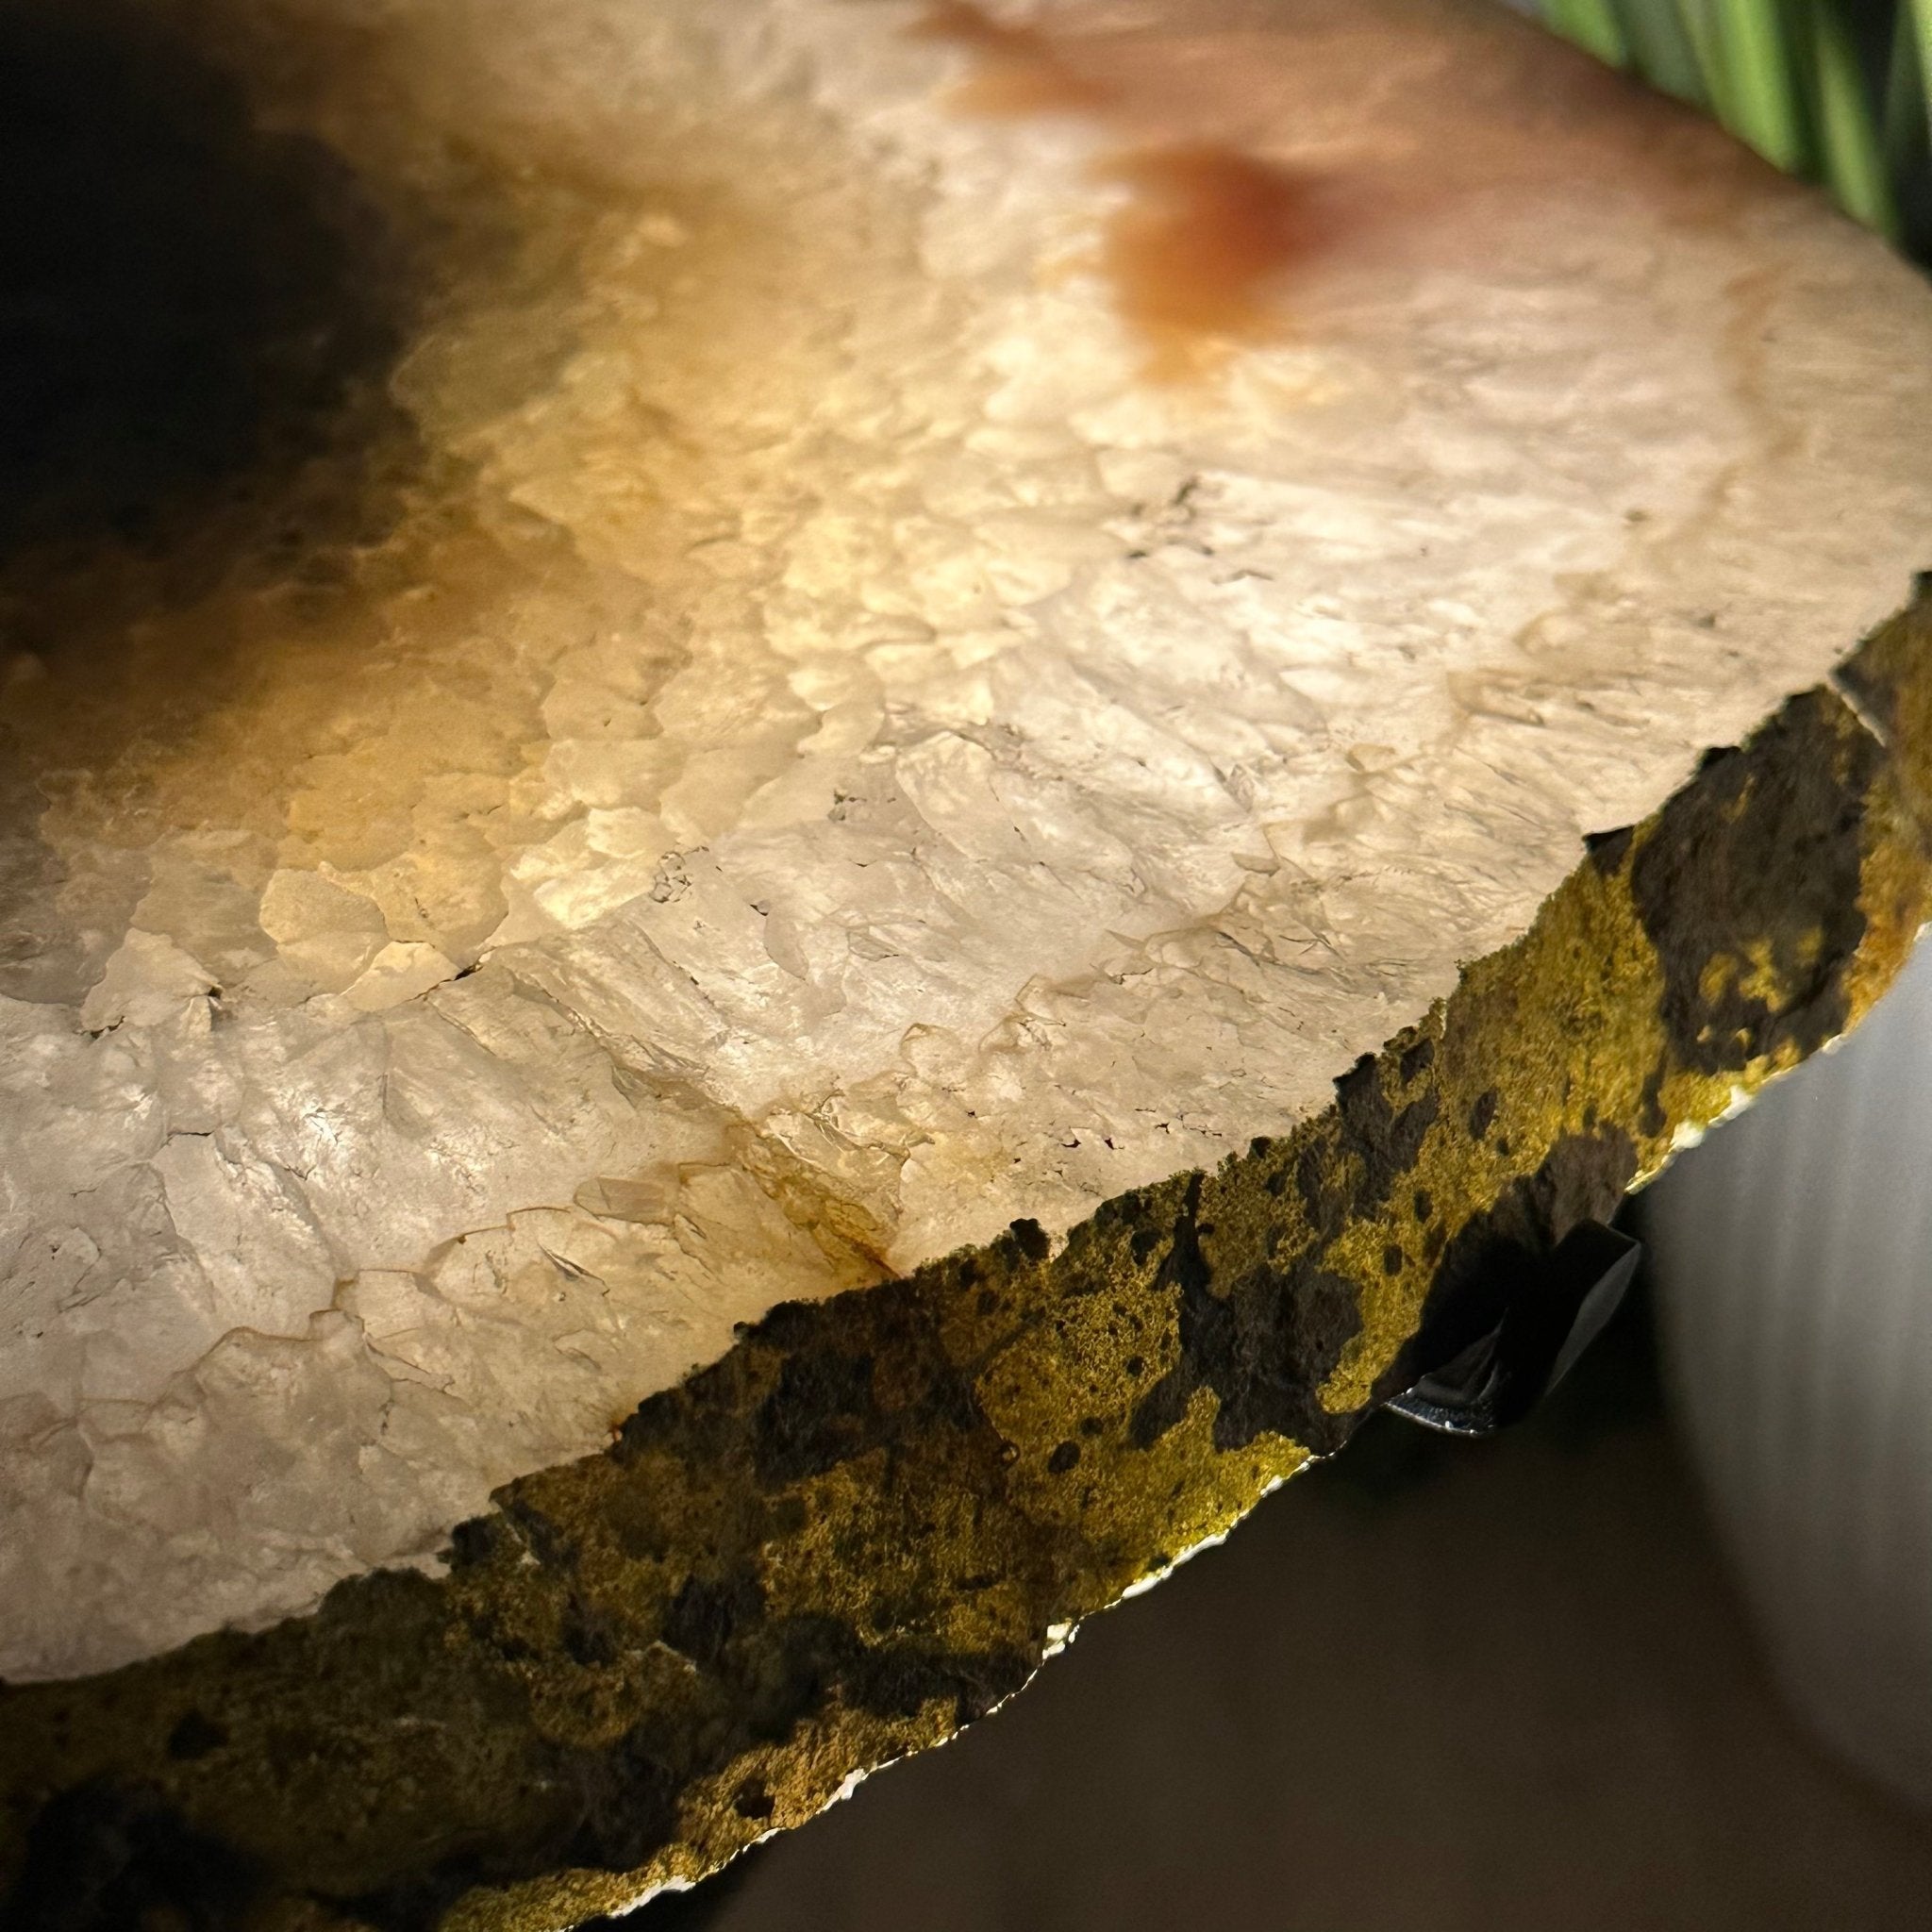 Natural Brazilian Agate Side Table on a black metal base, 22" tall #1305-0171 by Brazil Gems - Brazil GemsBrazil GemsNatural Brazilian Agate Side Table on a black metal base, 22" tall #1305-0171 by Brazil GemsTables: Side1305-0171